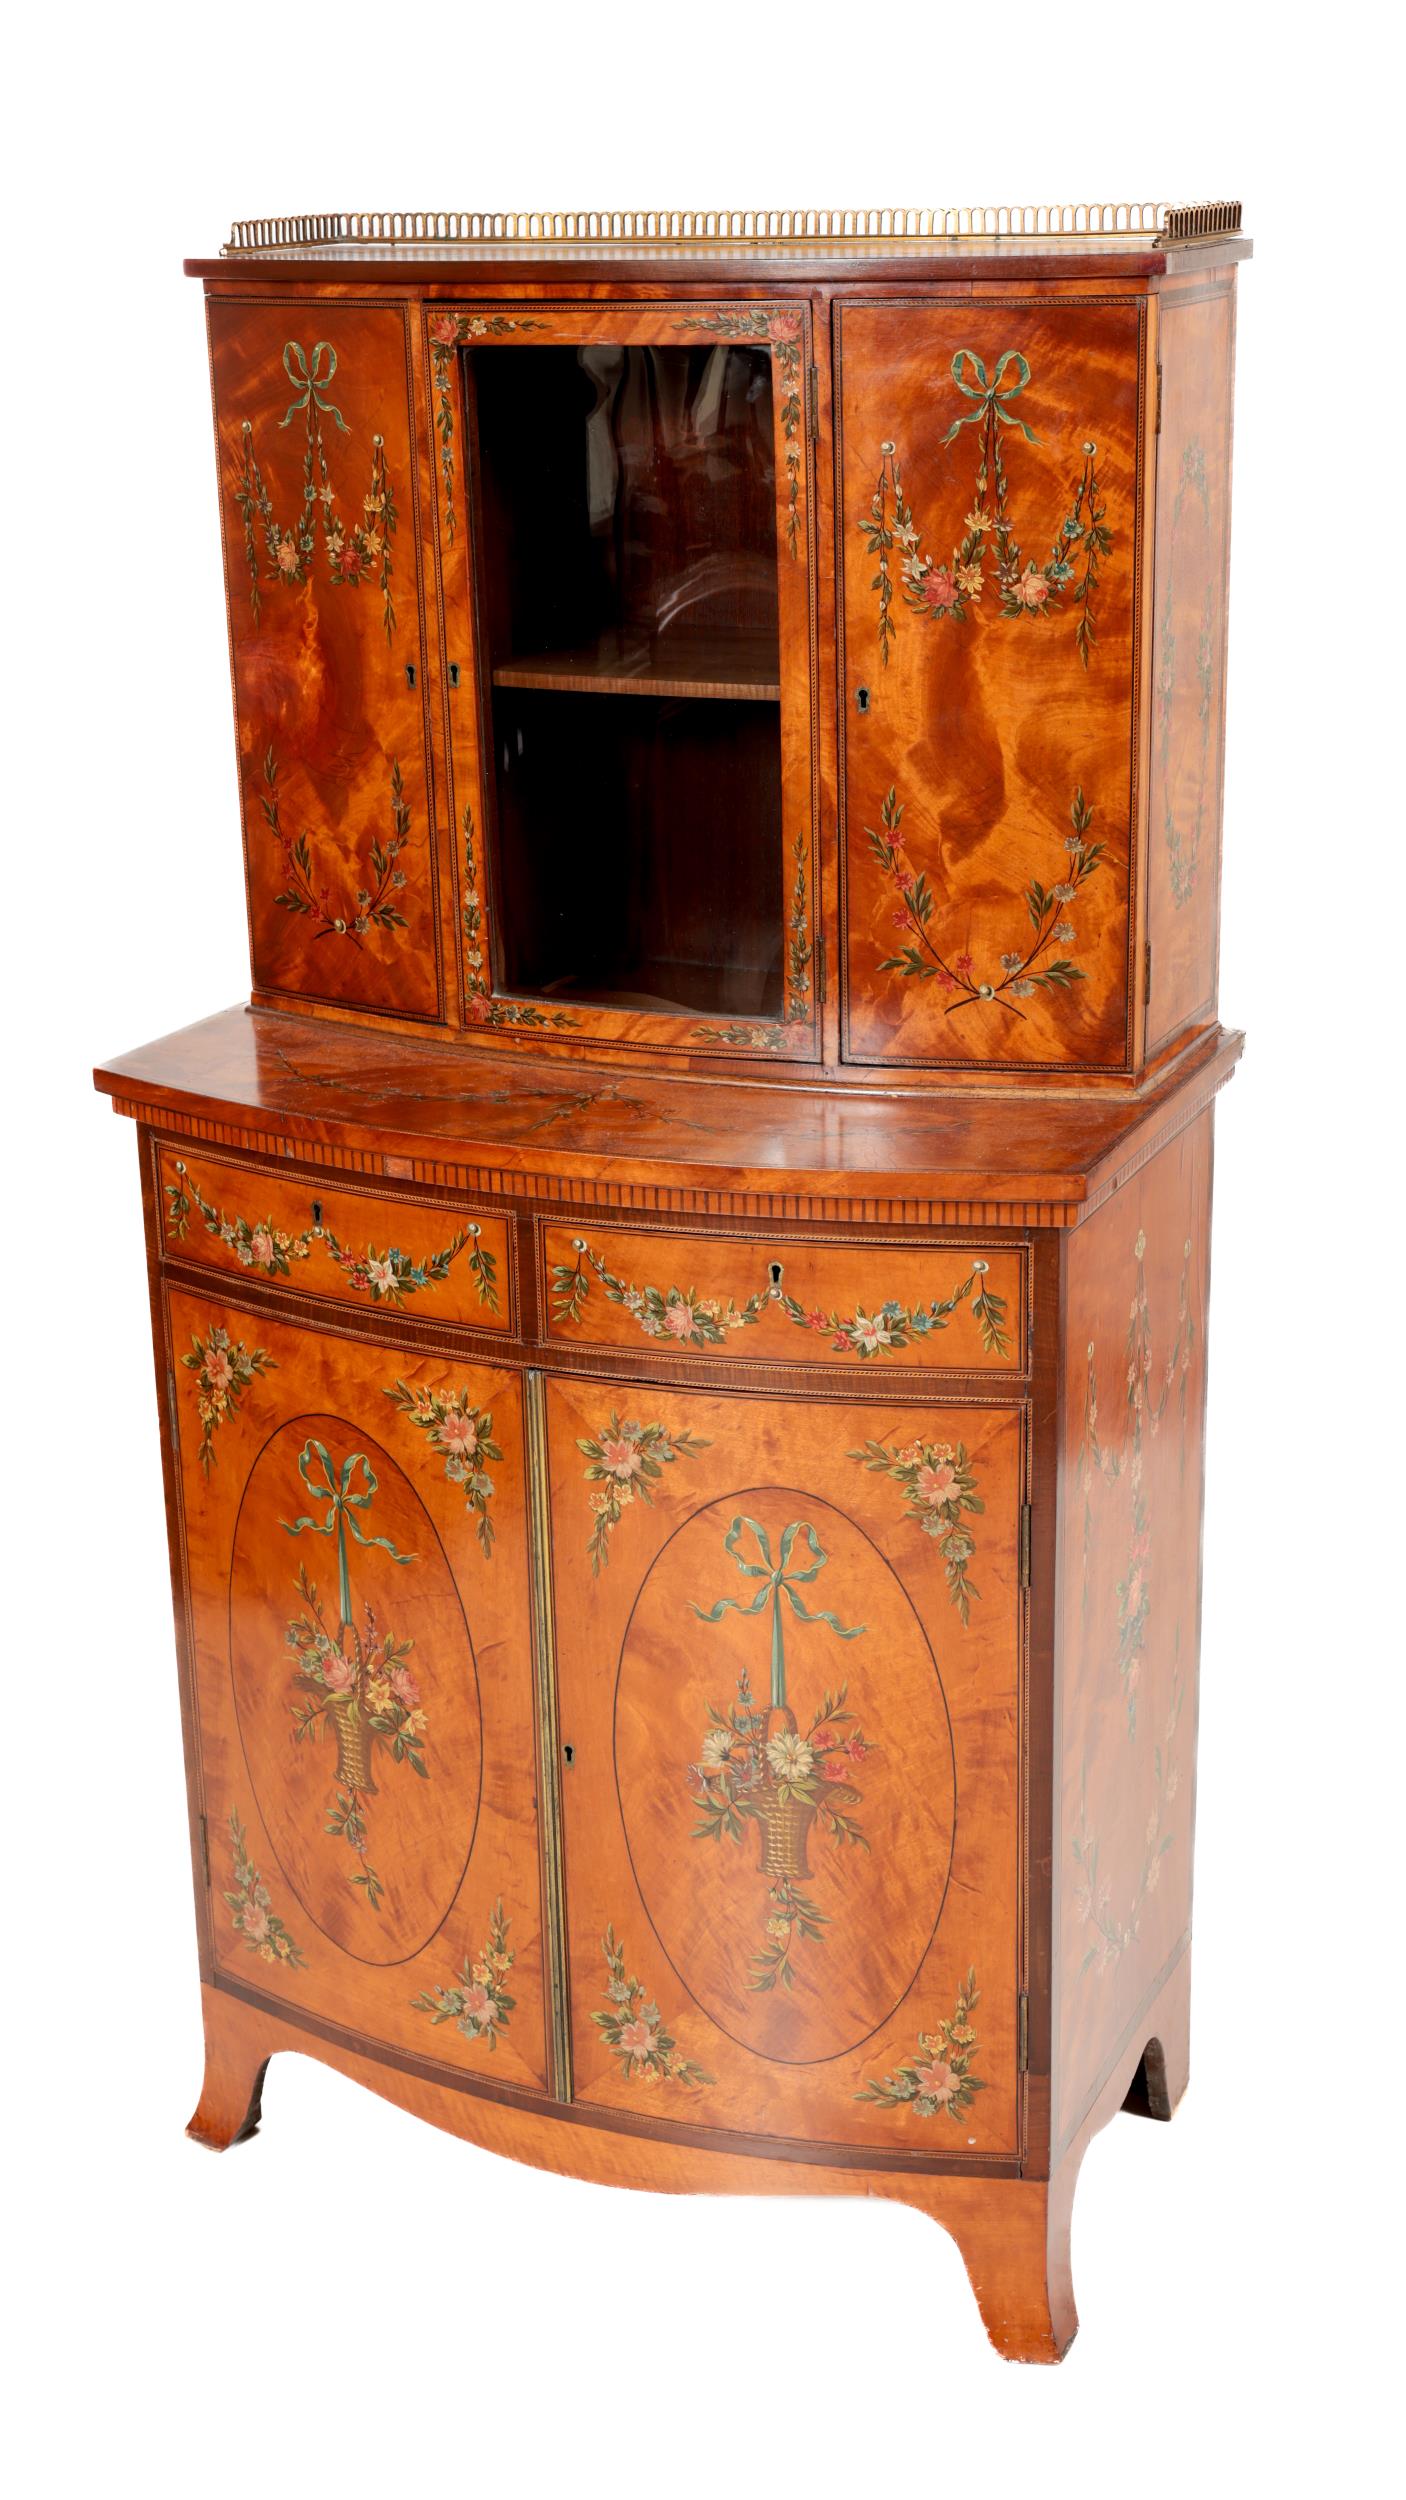 A fine quality satinwood hand painted Cabinet, of small proportions, the top section with pierced